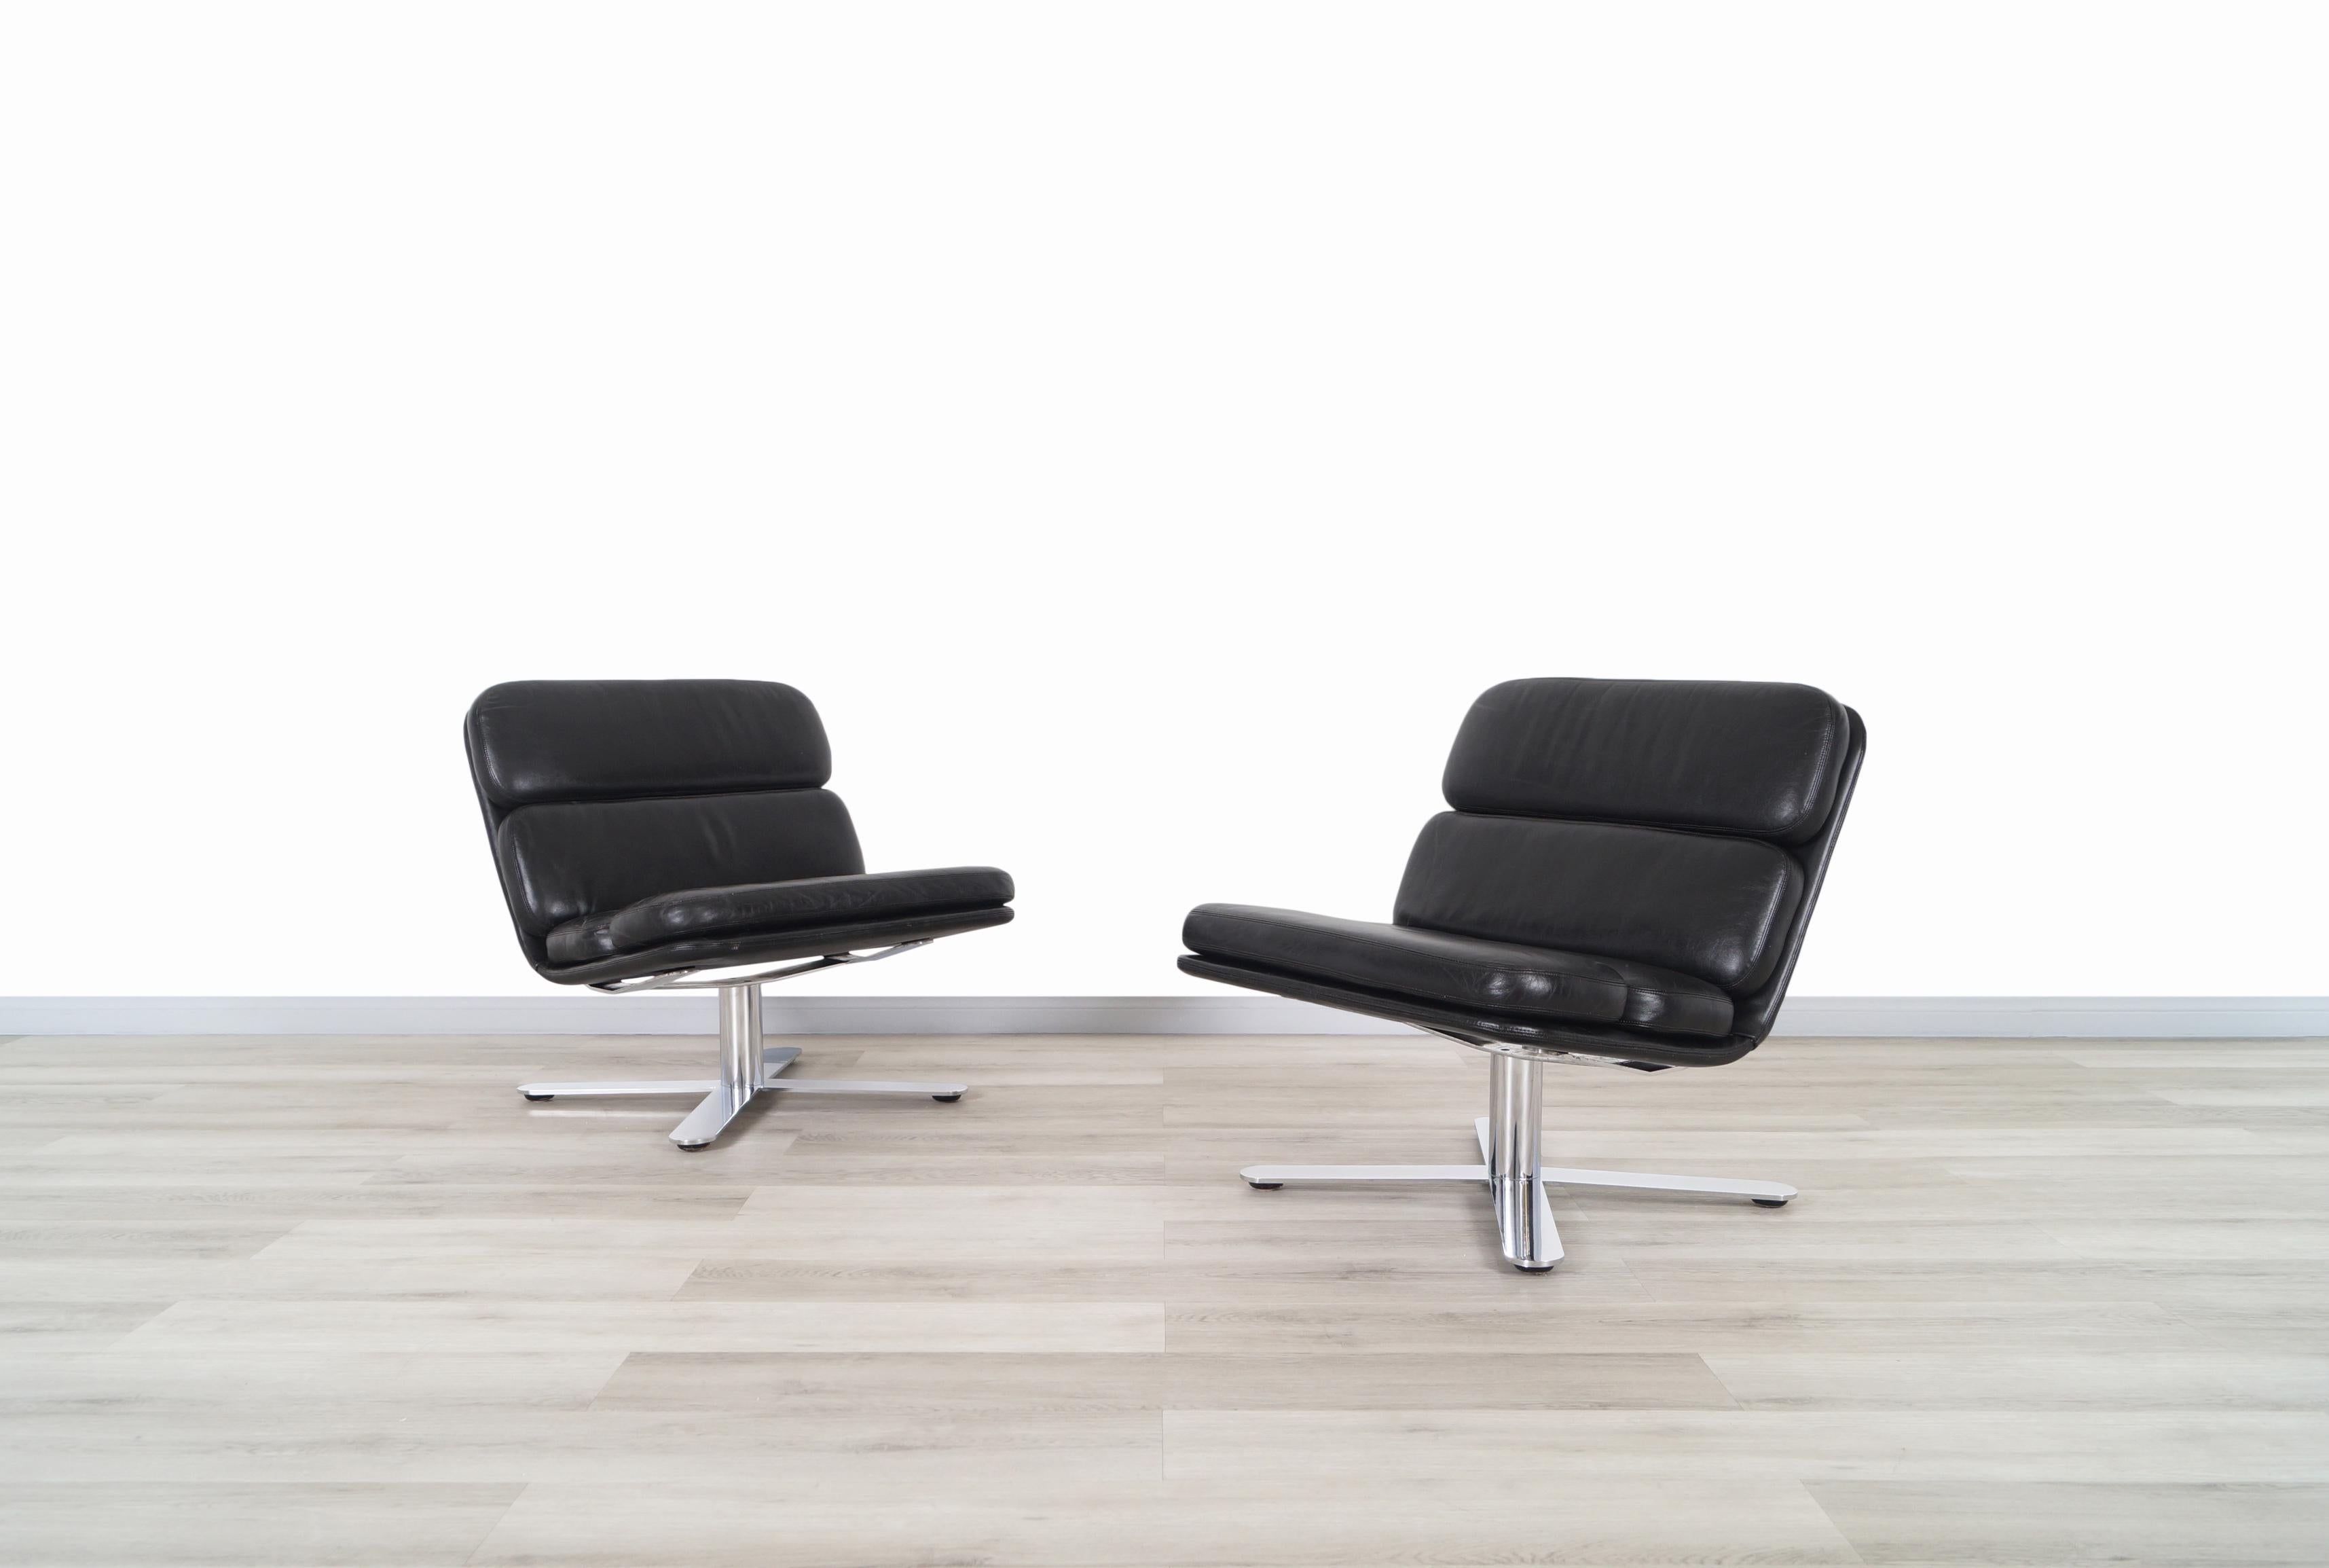 A stunning pair of vintage leather and chrome lounge chairs designed by John Follis for Fortress in the United States, circa 1970s. They are known as the 